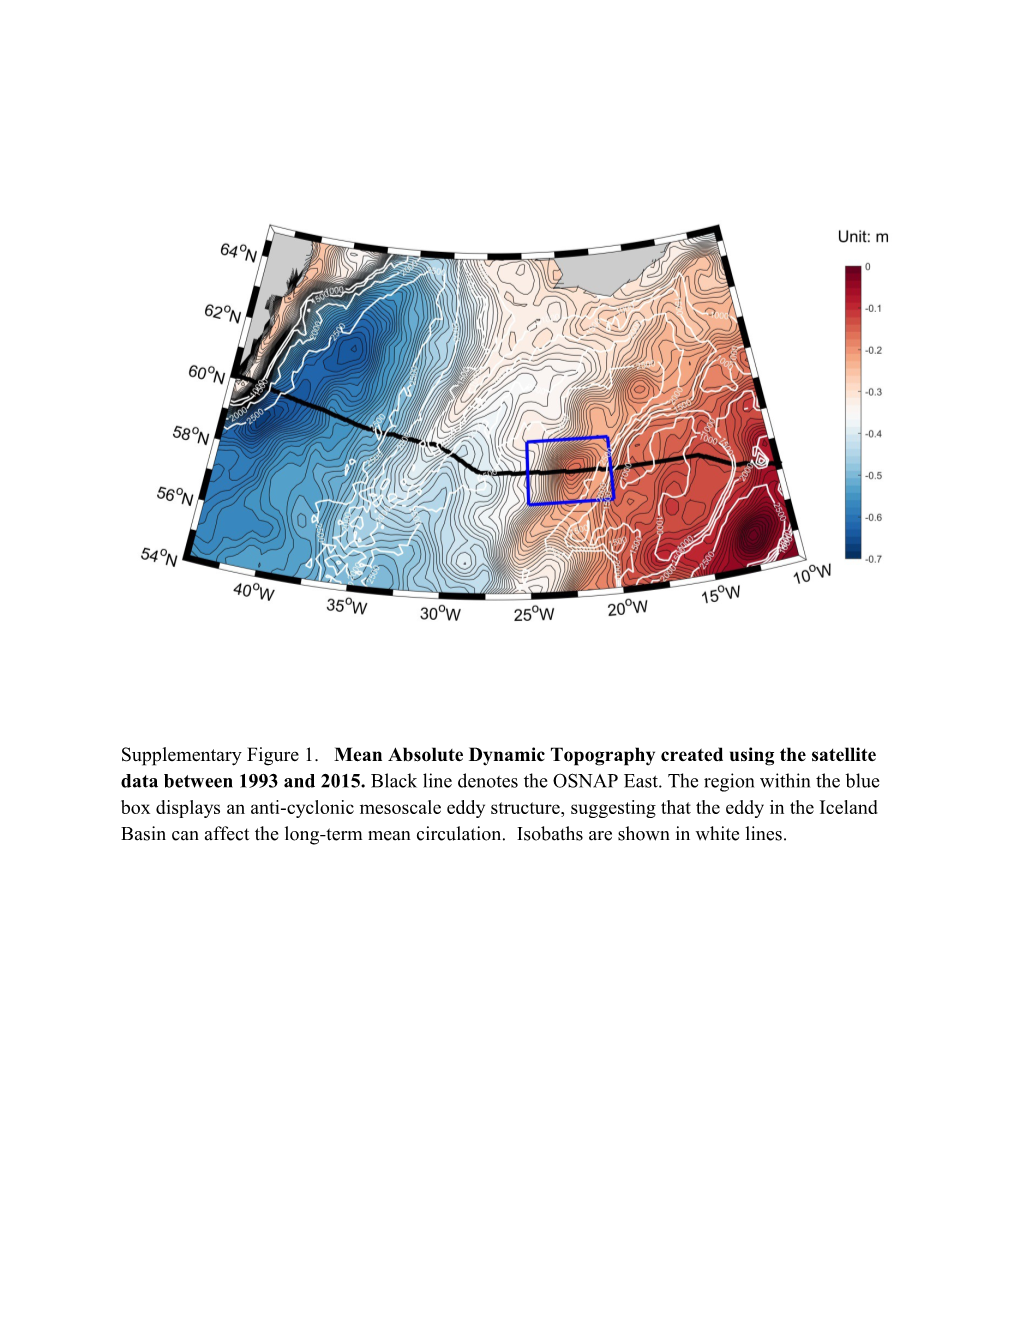 Supplementary Figure 1. Mean Absolute Dynamic Topography Created Using the Satellite Data